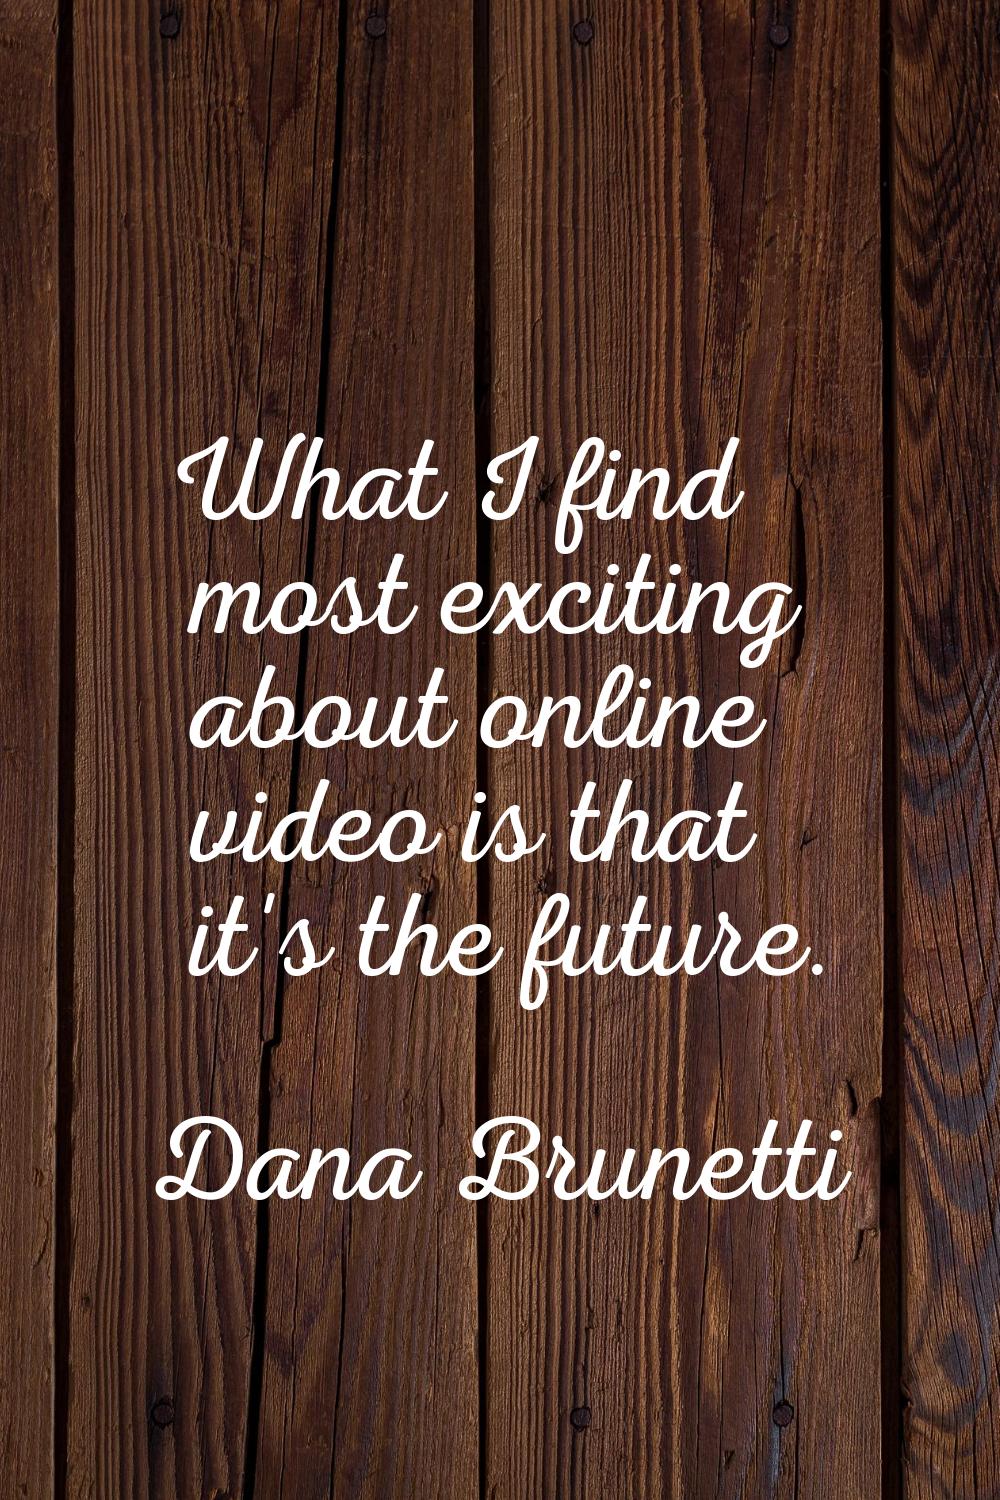 What I find most exciting about online video is that it's the future.